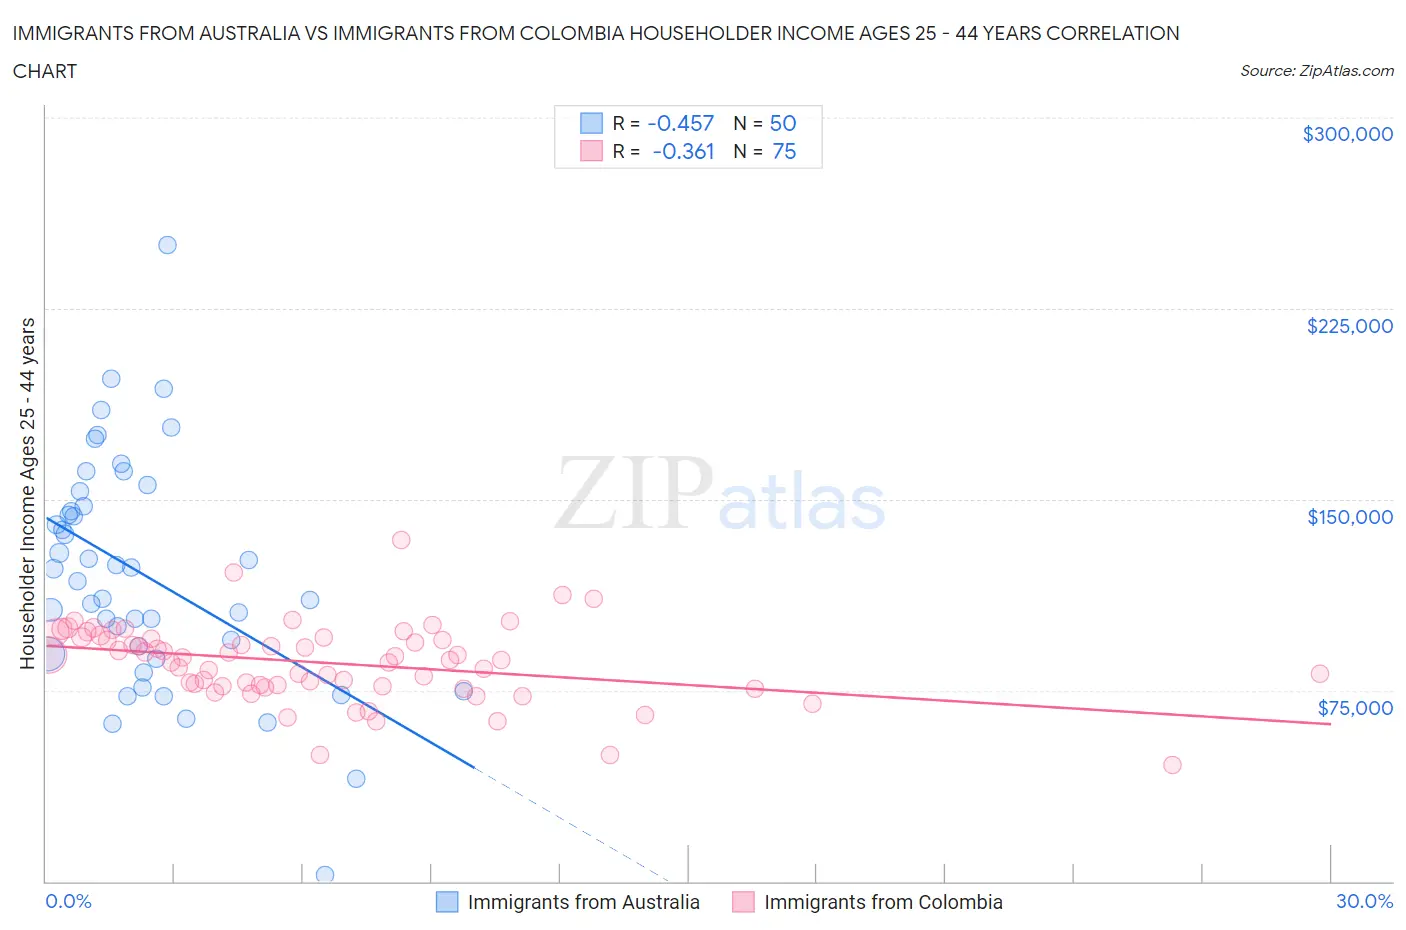 Immigrants from Australia vs Immigrants from Colombia Householder Income Ages 25 - 44 years